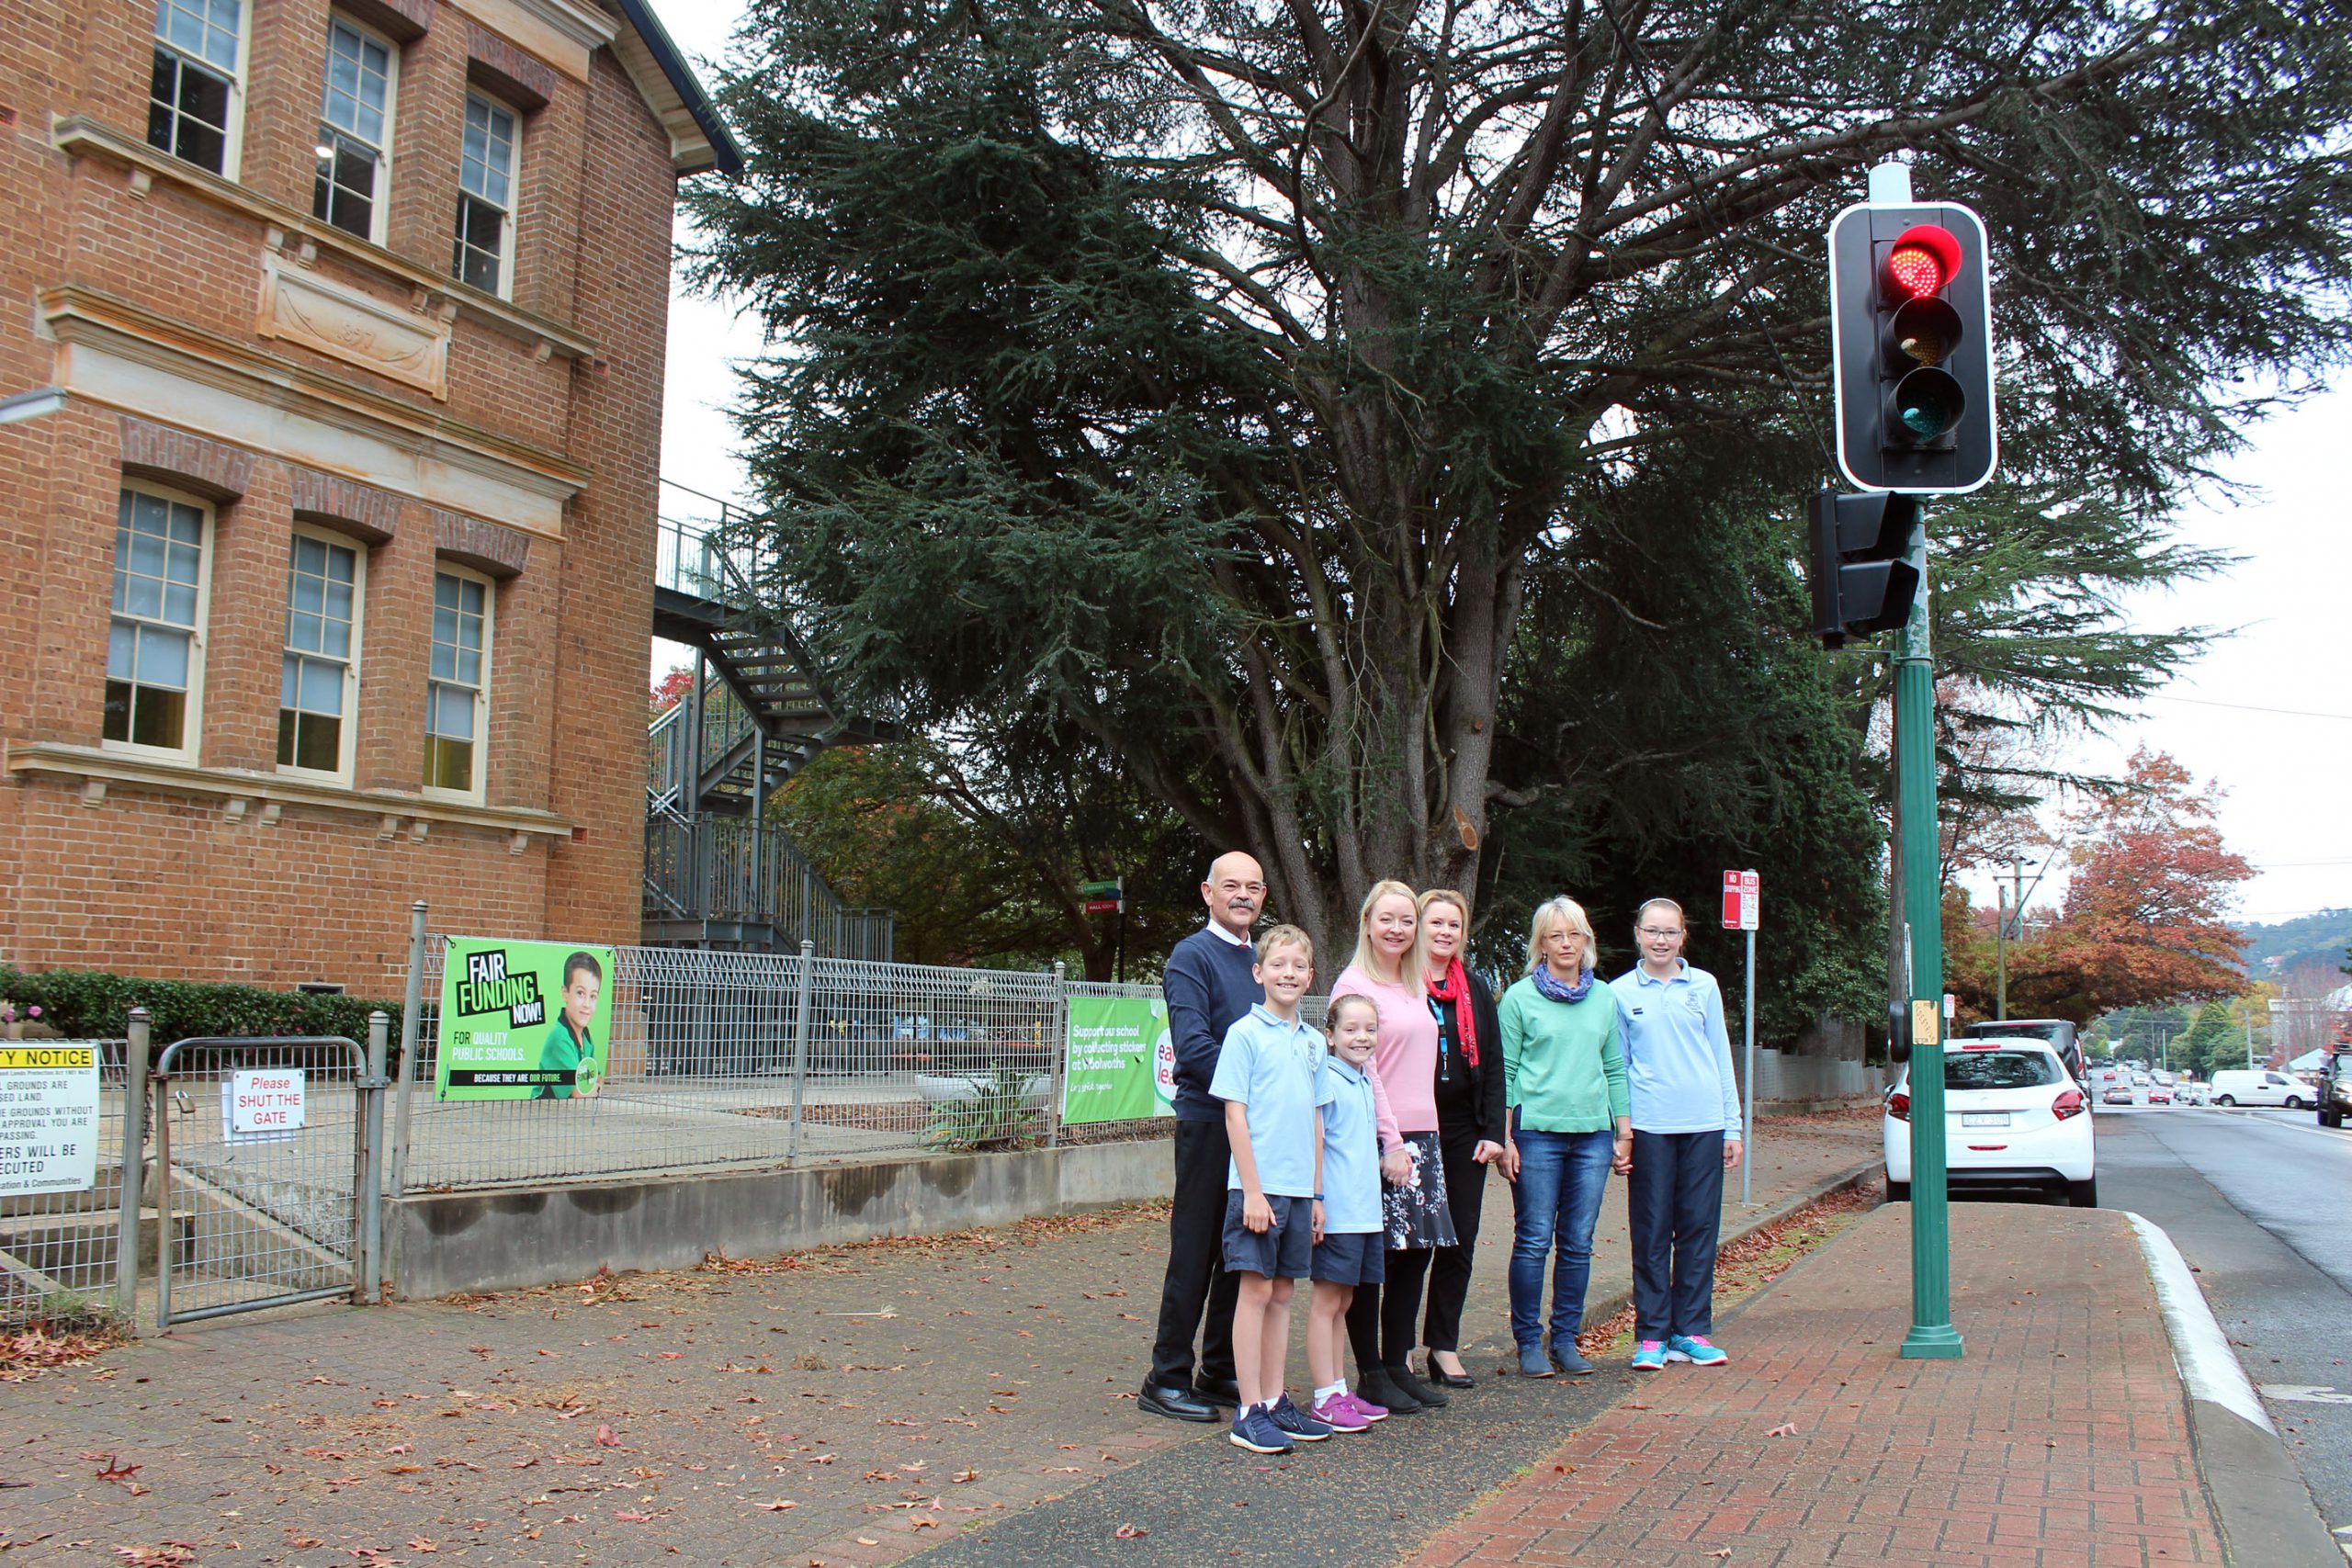 Council’s Road Safety Officer with Principal Graham and concerned parents at the Bendooley Street traffic signals